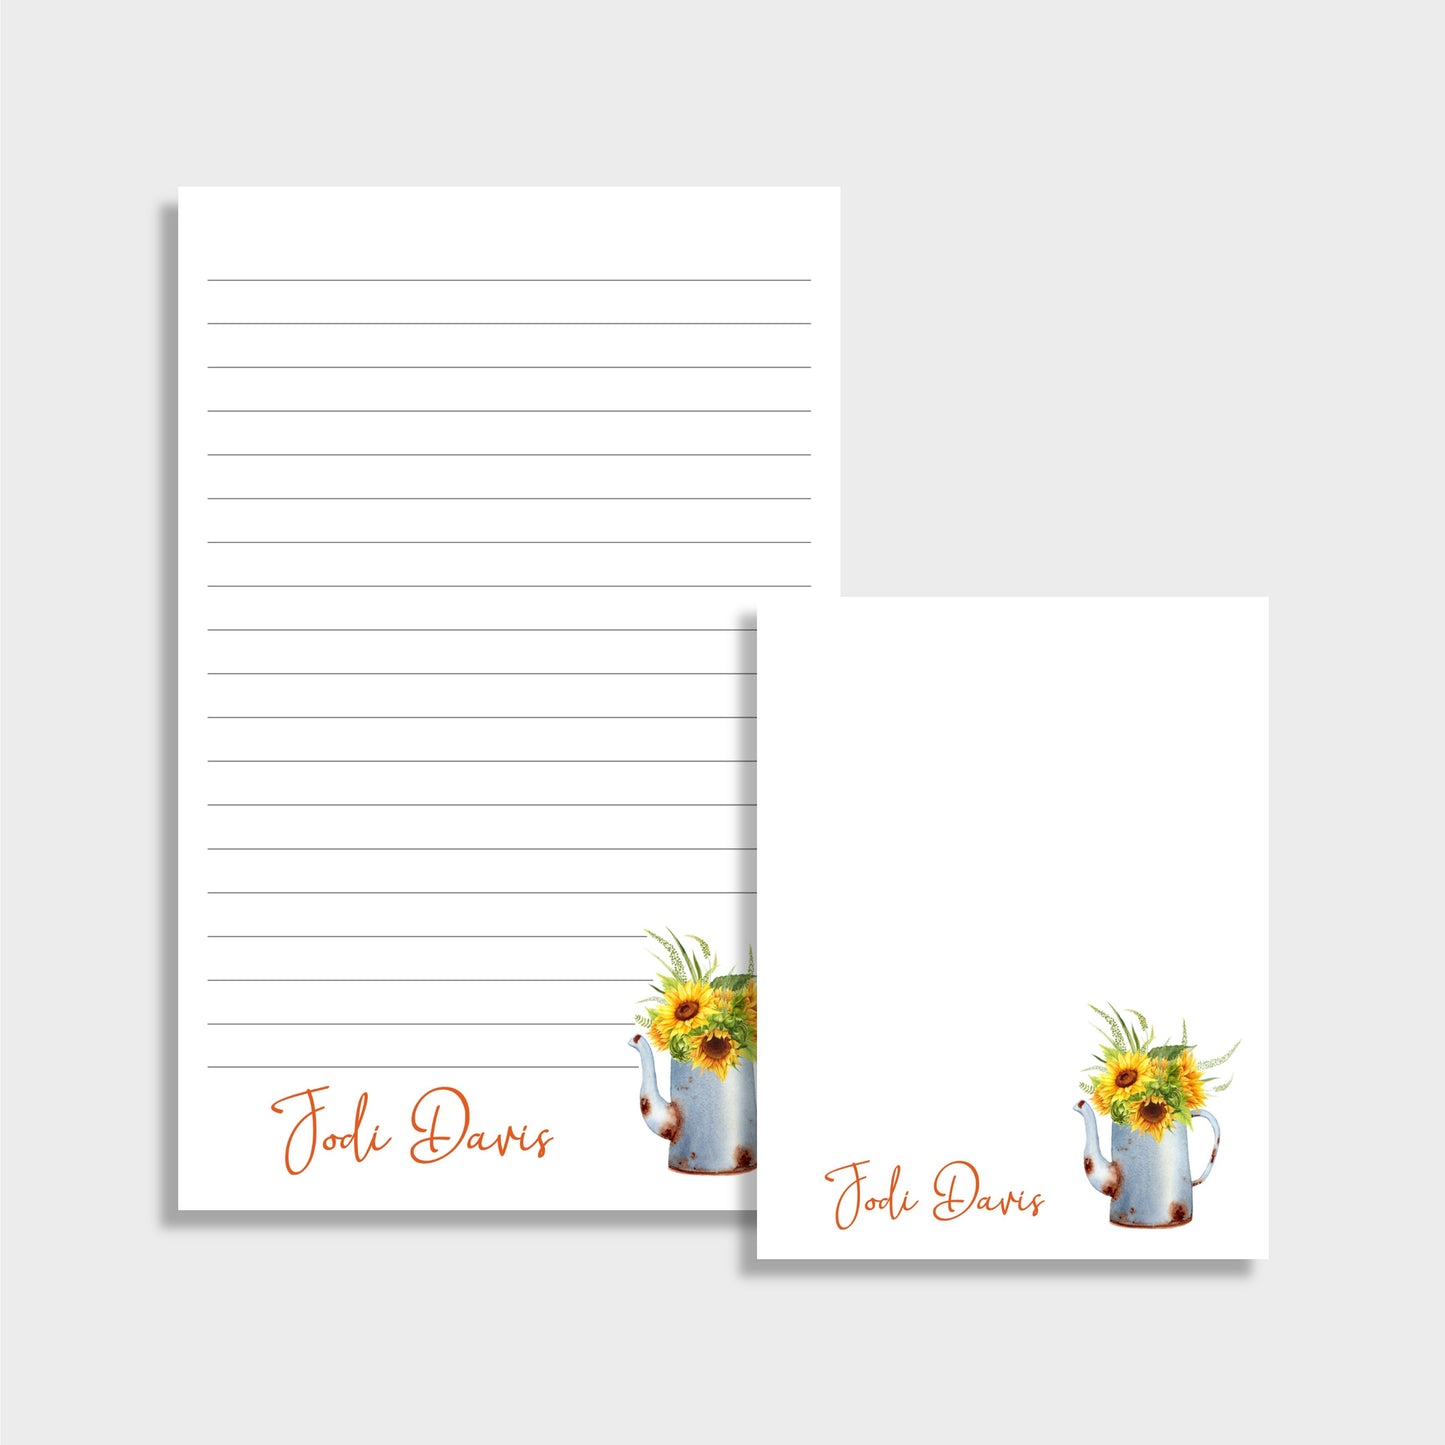 Sunflowers & Watering Can Personalized Notepad